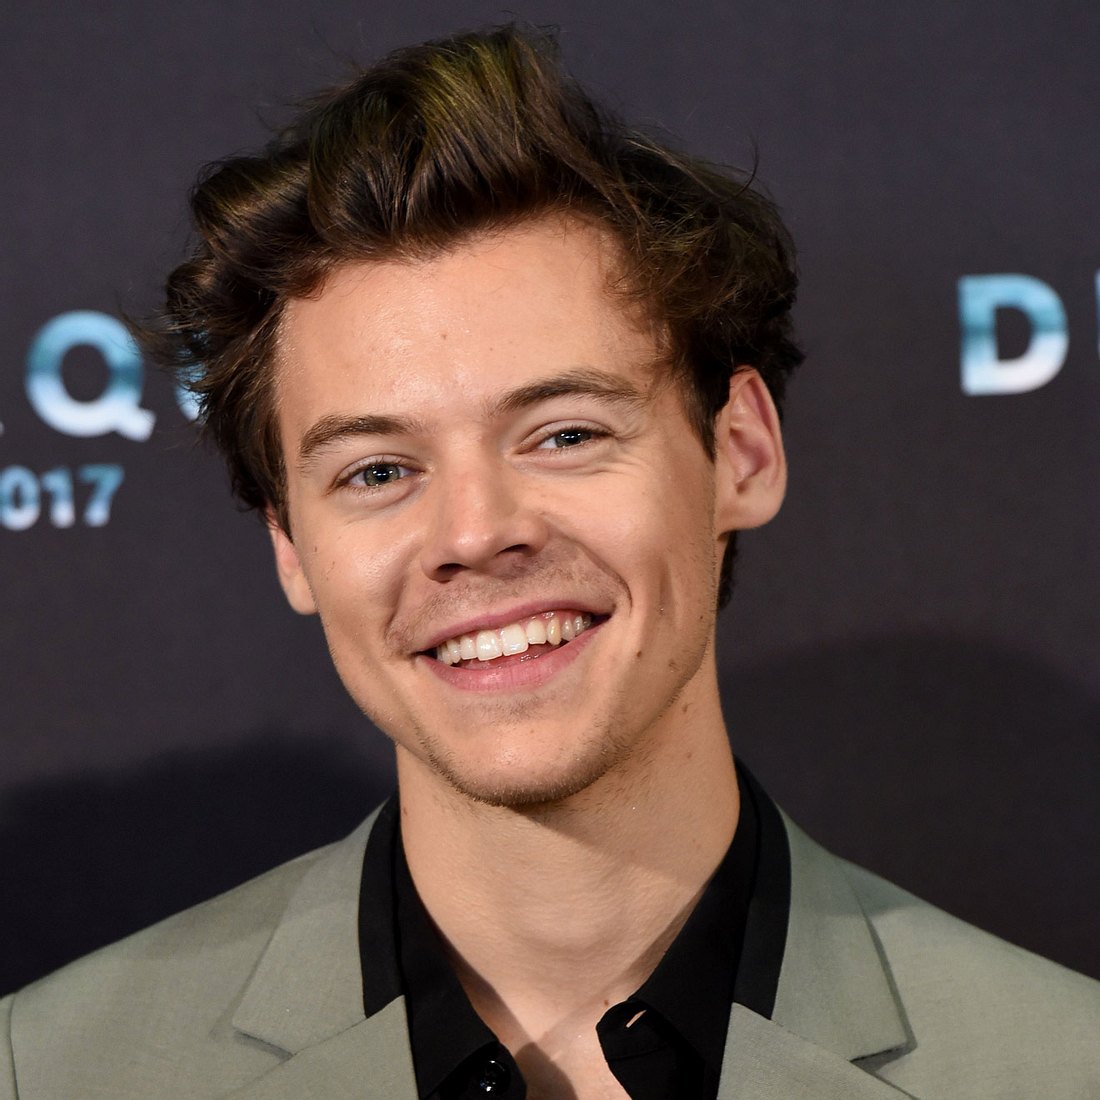 One Direction: Harry Styles datet dieses Model